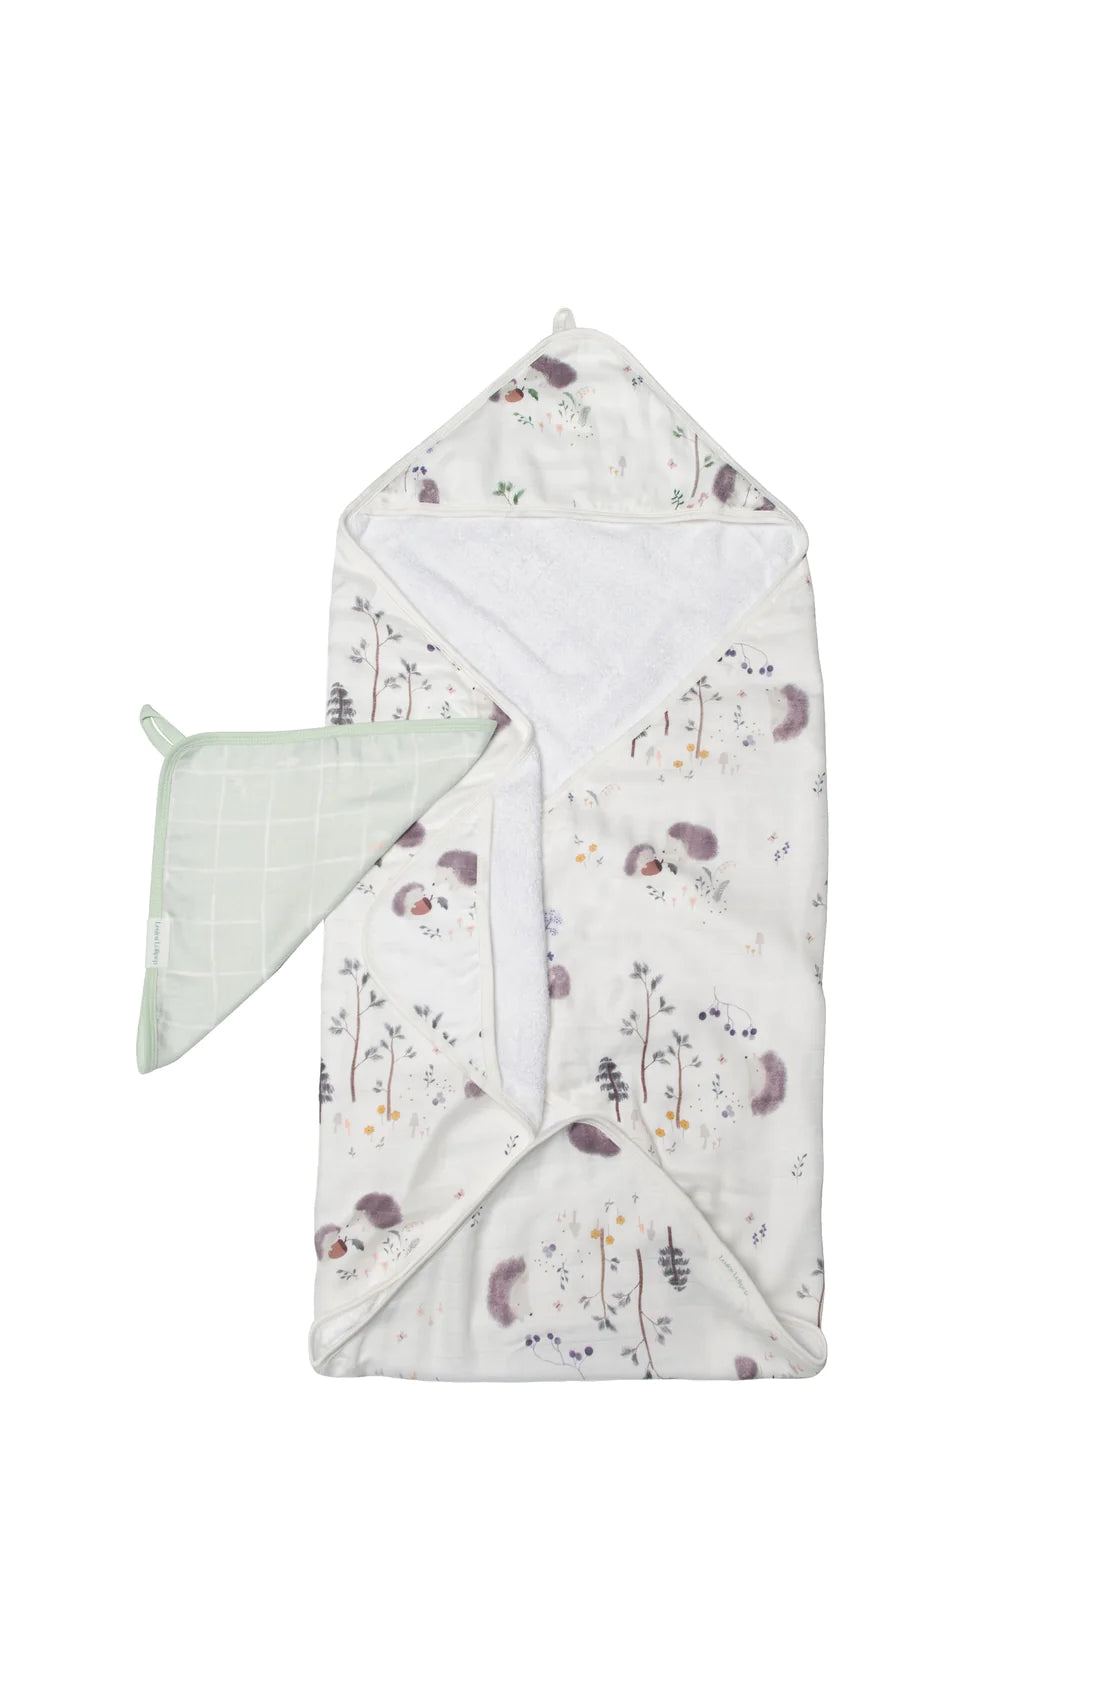 Loulou Lollipop Hooded Towel and Washcloth Set - Hedgehogs